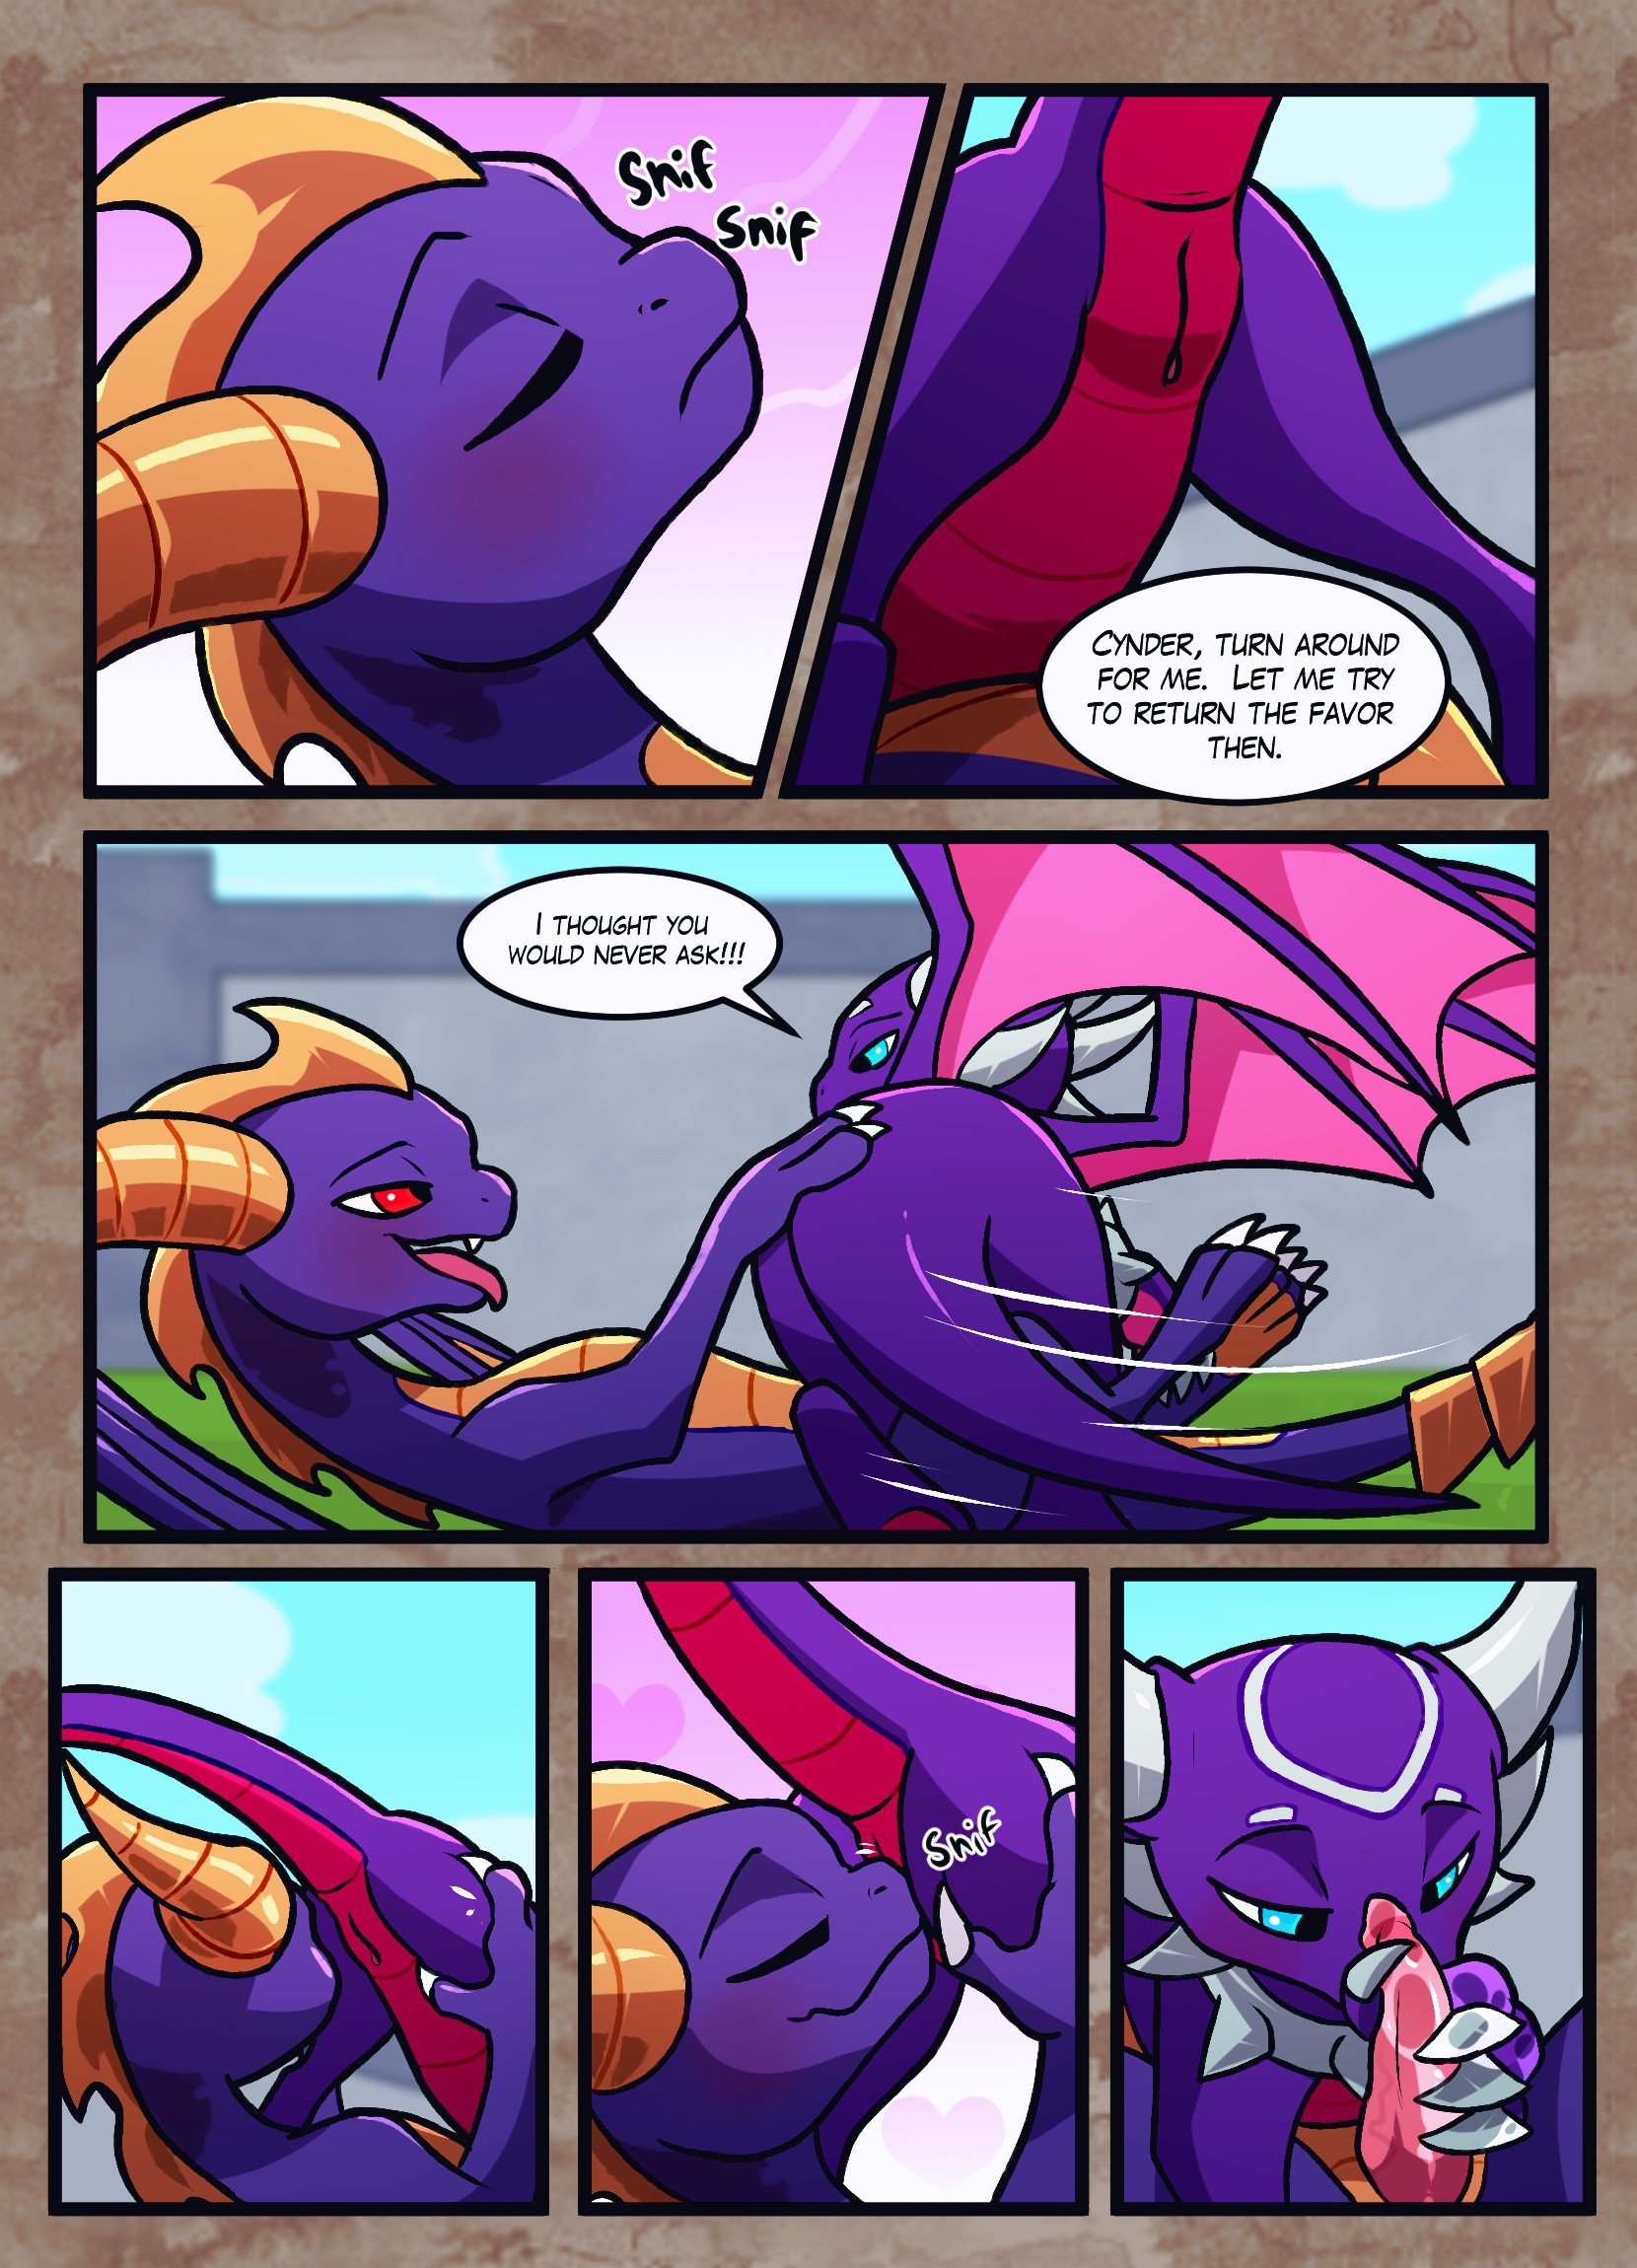 A Friend In Need porn comic page 014